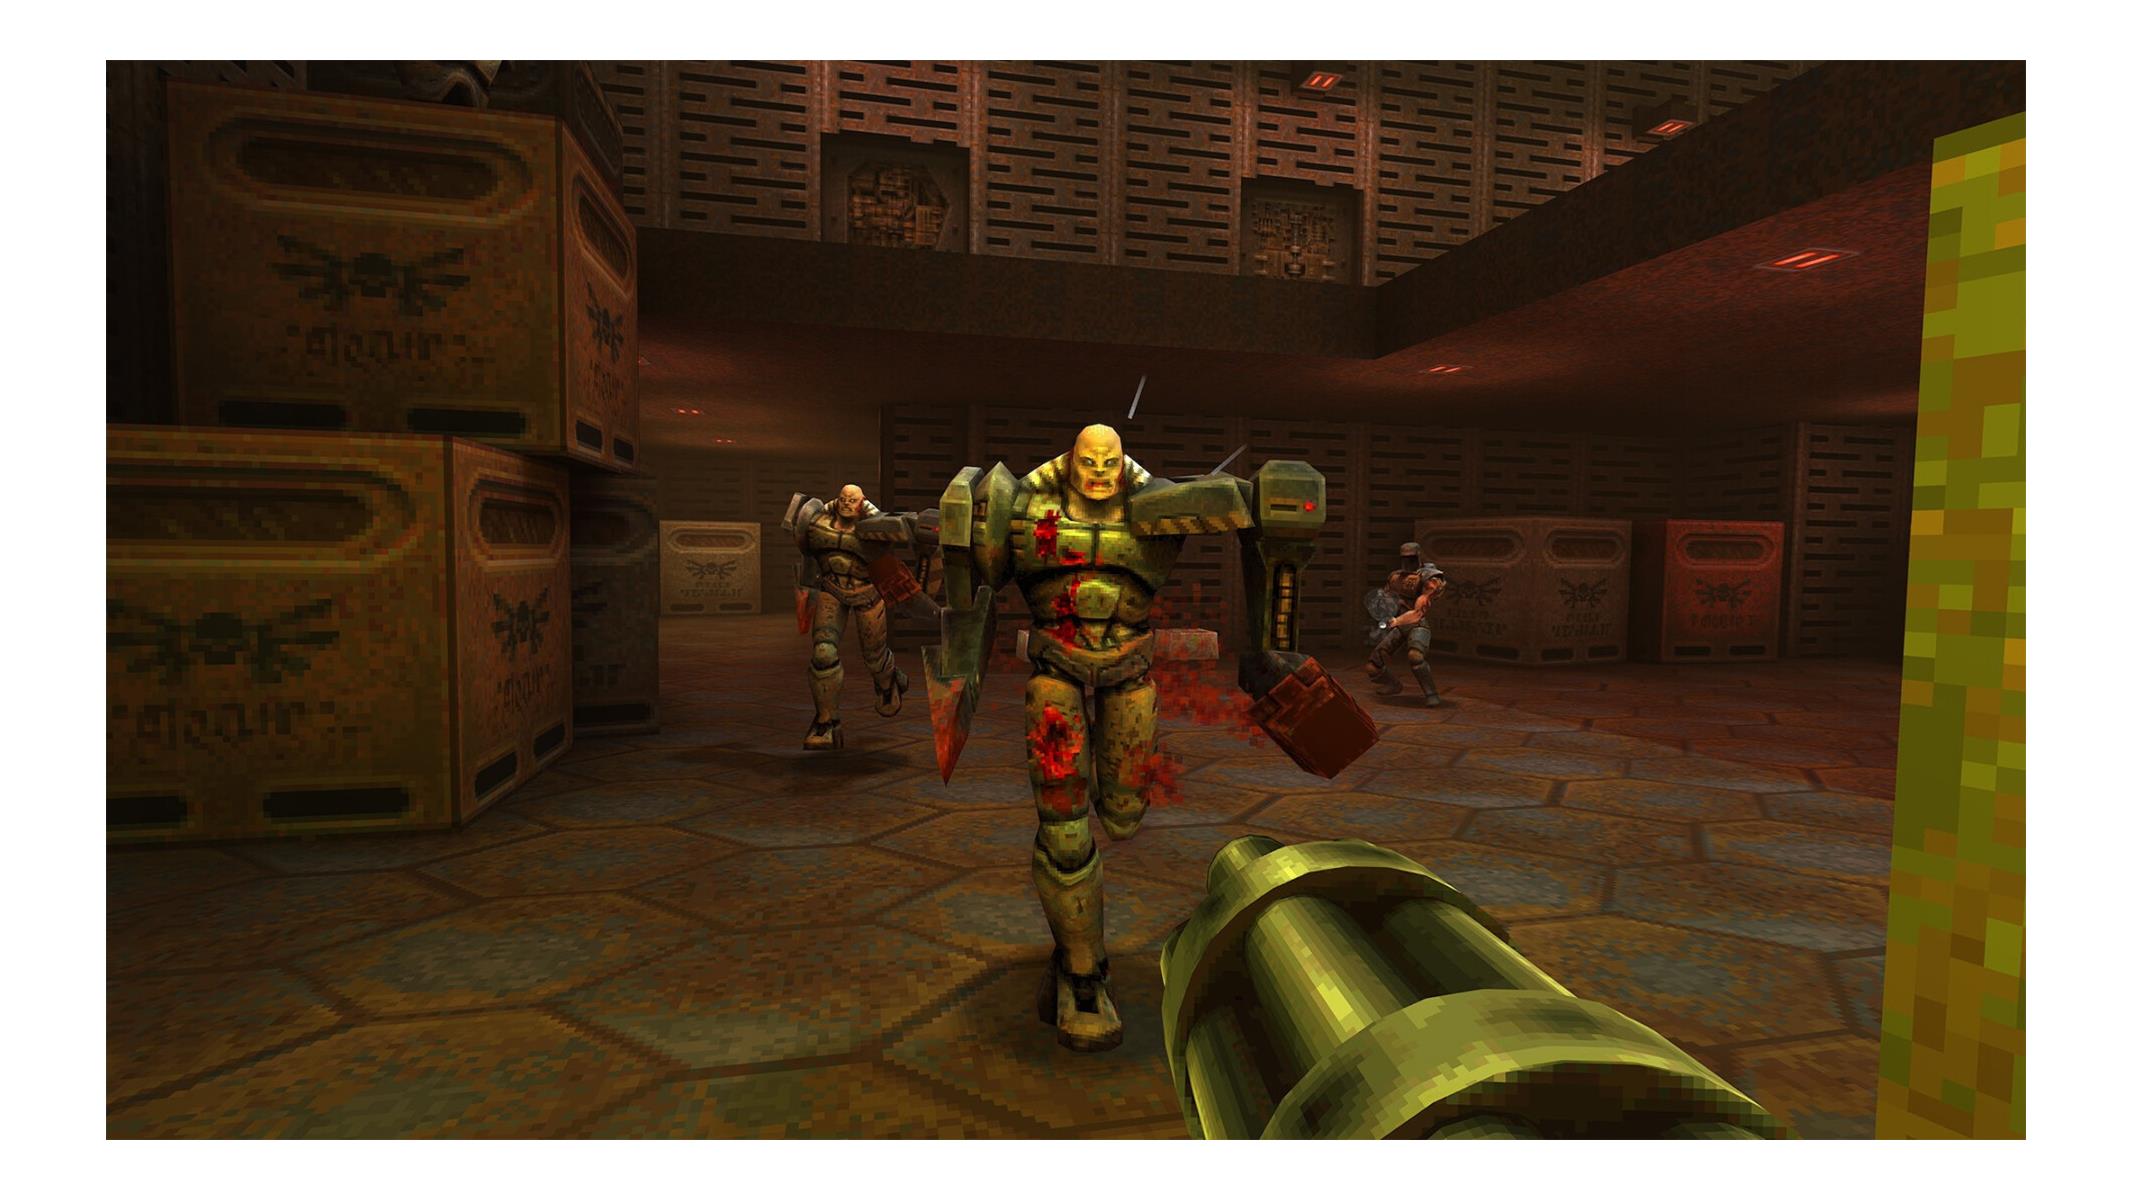 Quake 2 2023 tech review: this is how to remaster a game